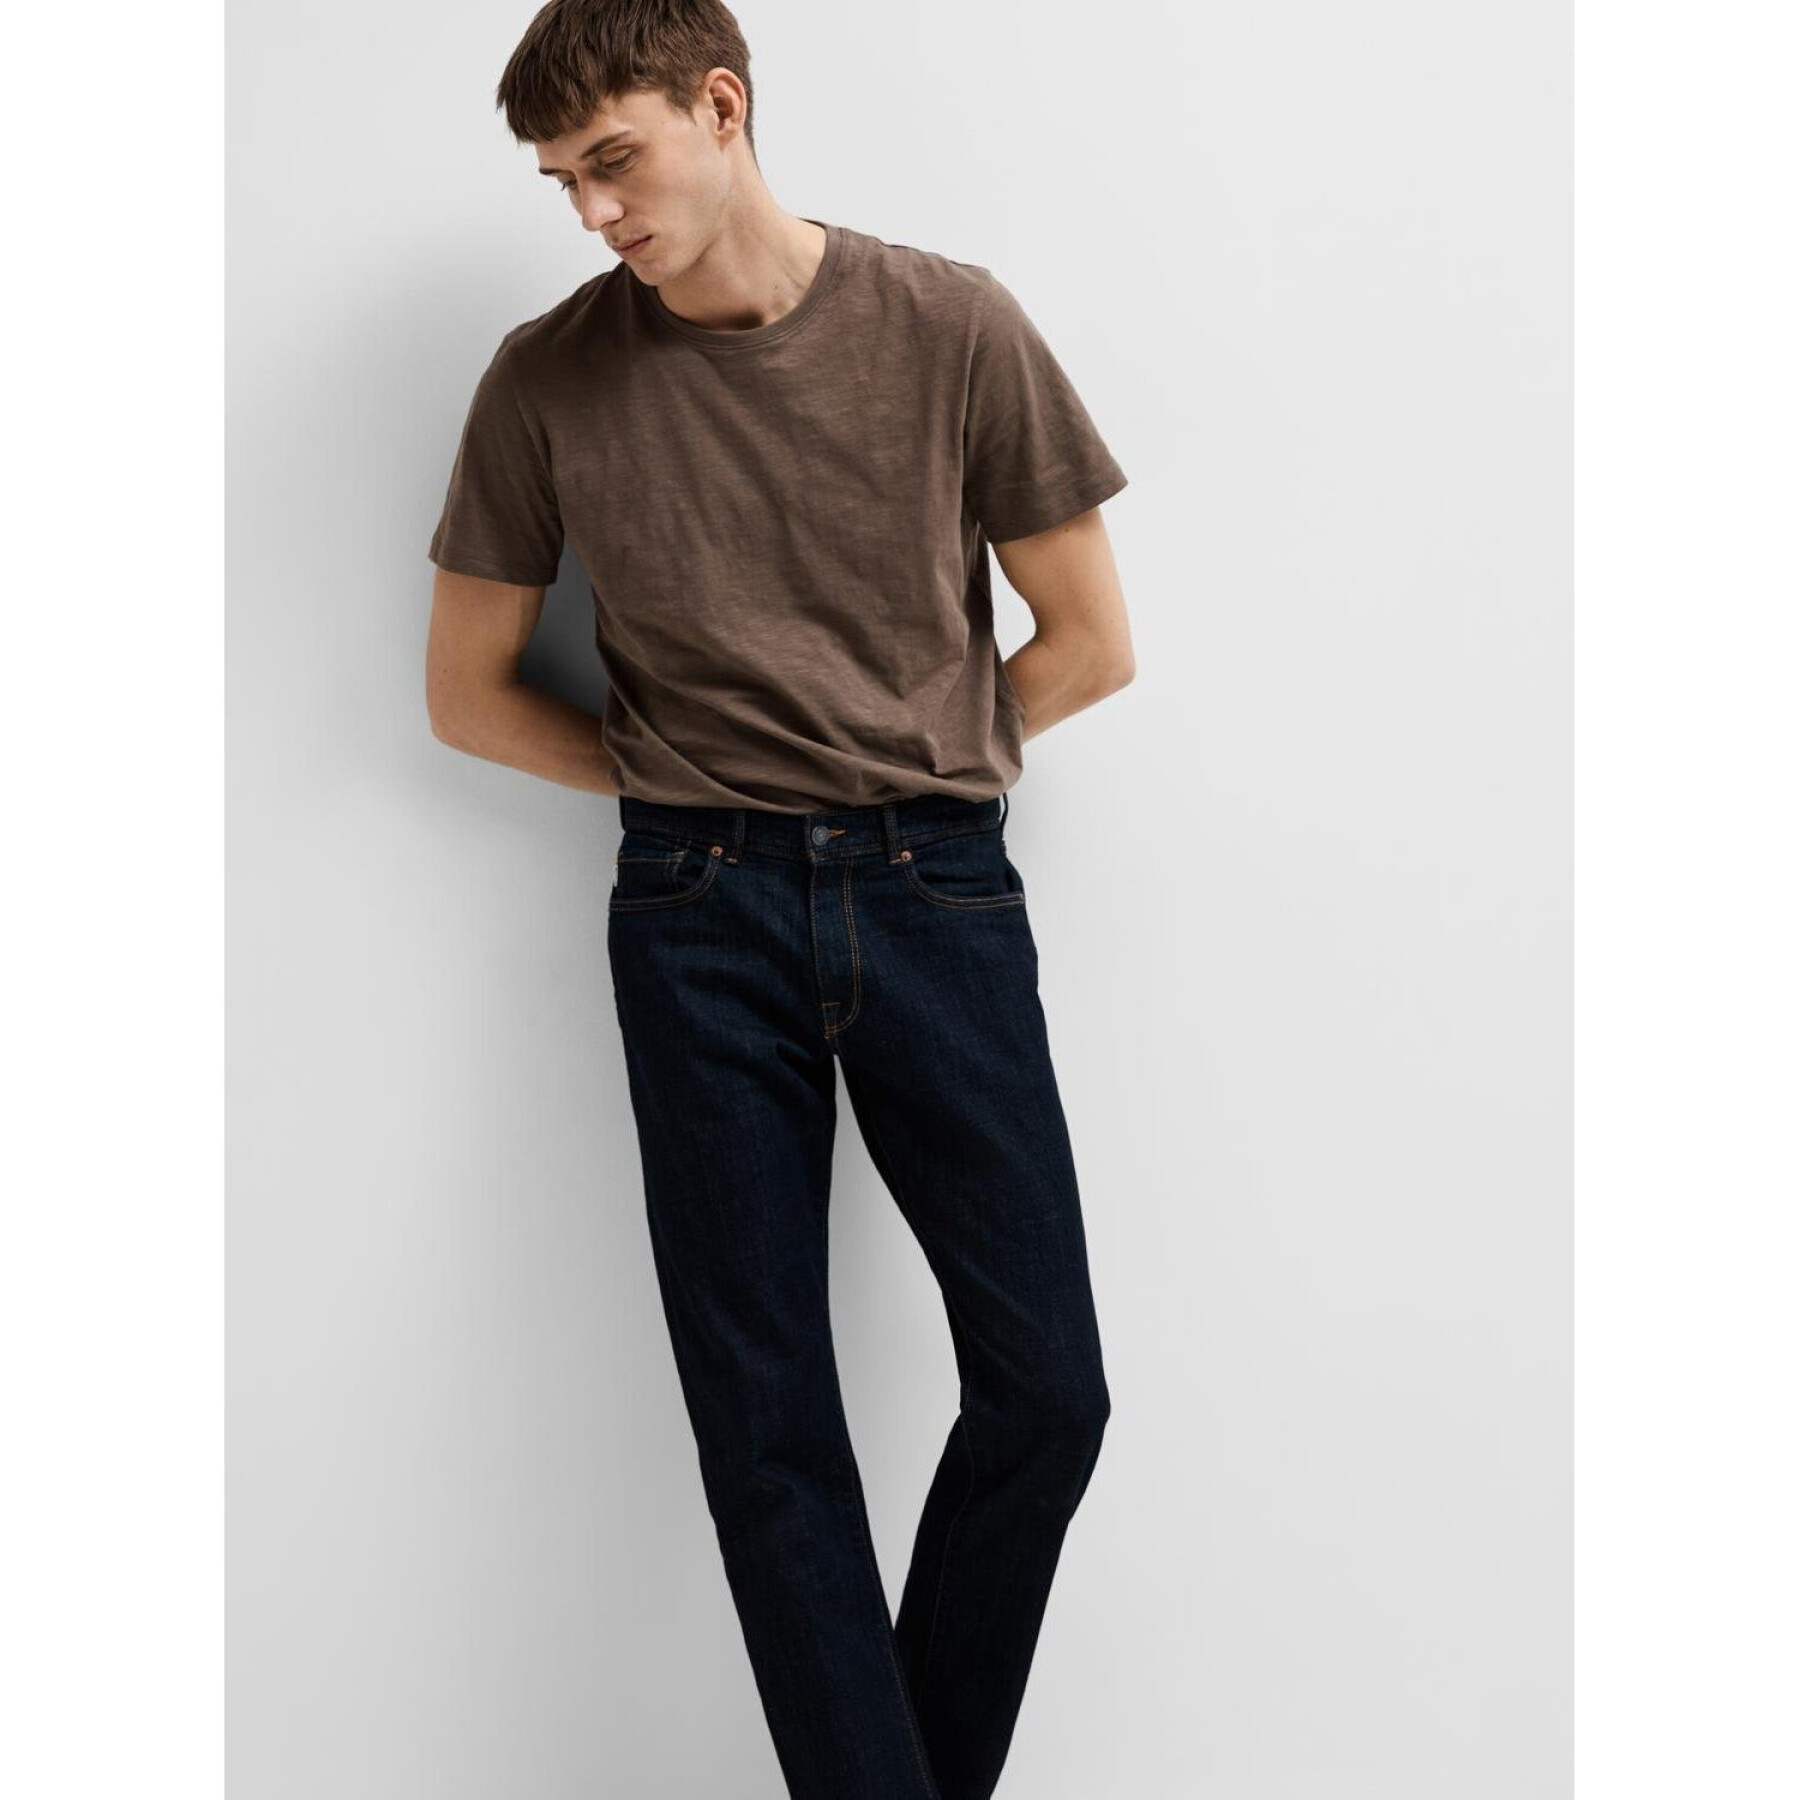 Jeans Selected 196-Straights Cot 3402 Rinse